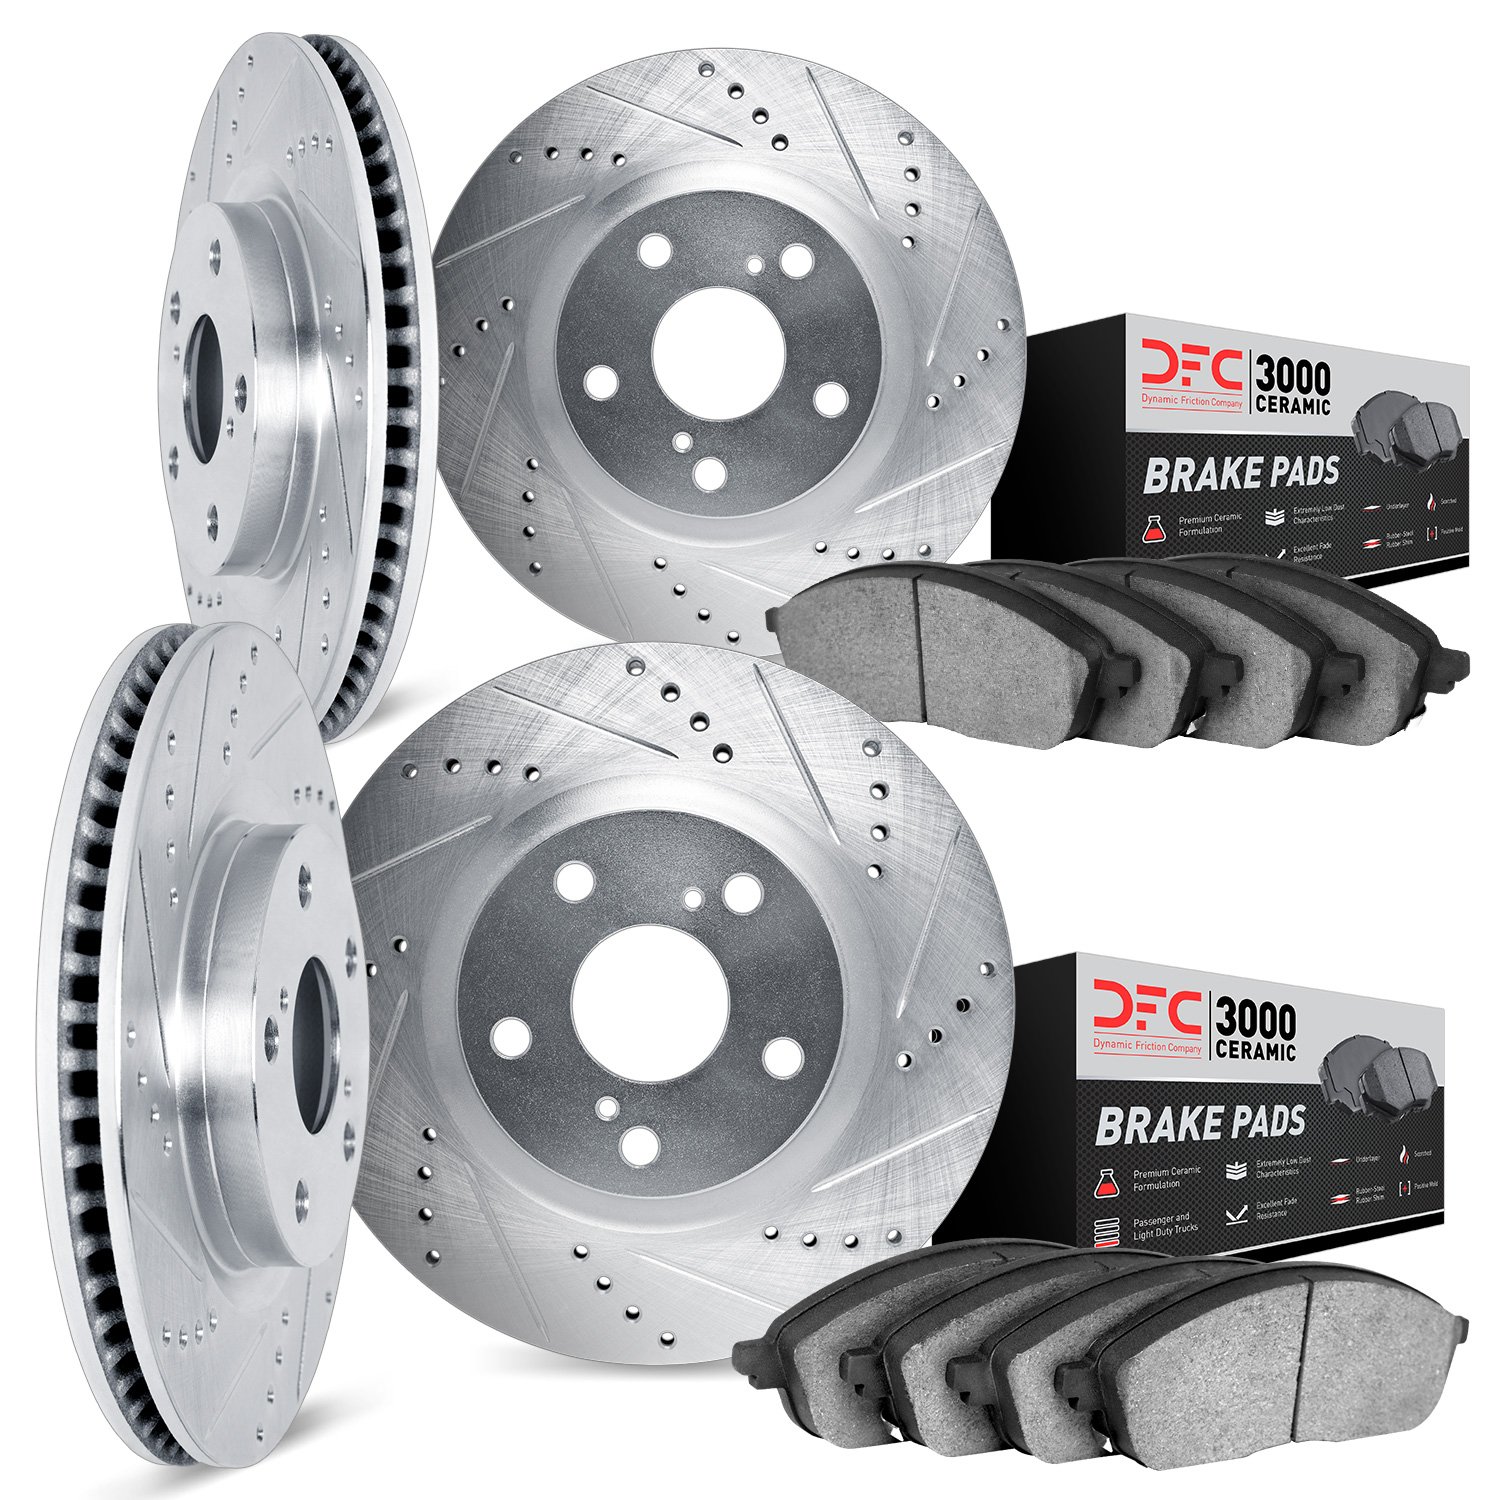 7304-80011 Drilled/Slotted Brake Rotor with 3000-Series Ceramic Brake Pads Kit [Silver], 1993-1995 Ford/Lincoln/Mercury/Mazda, P